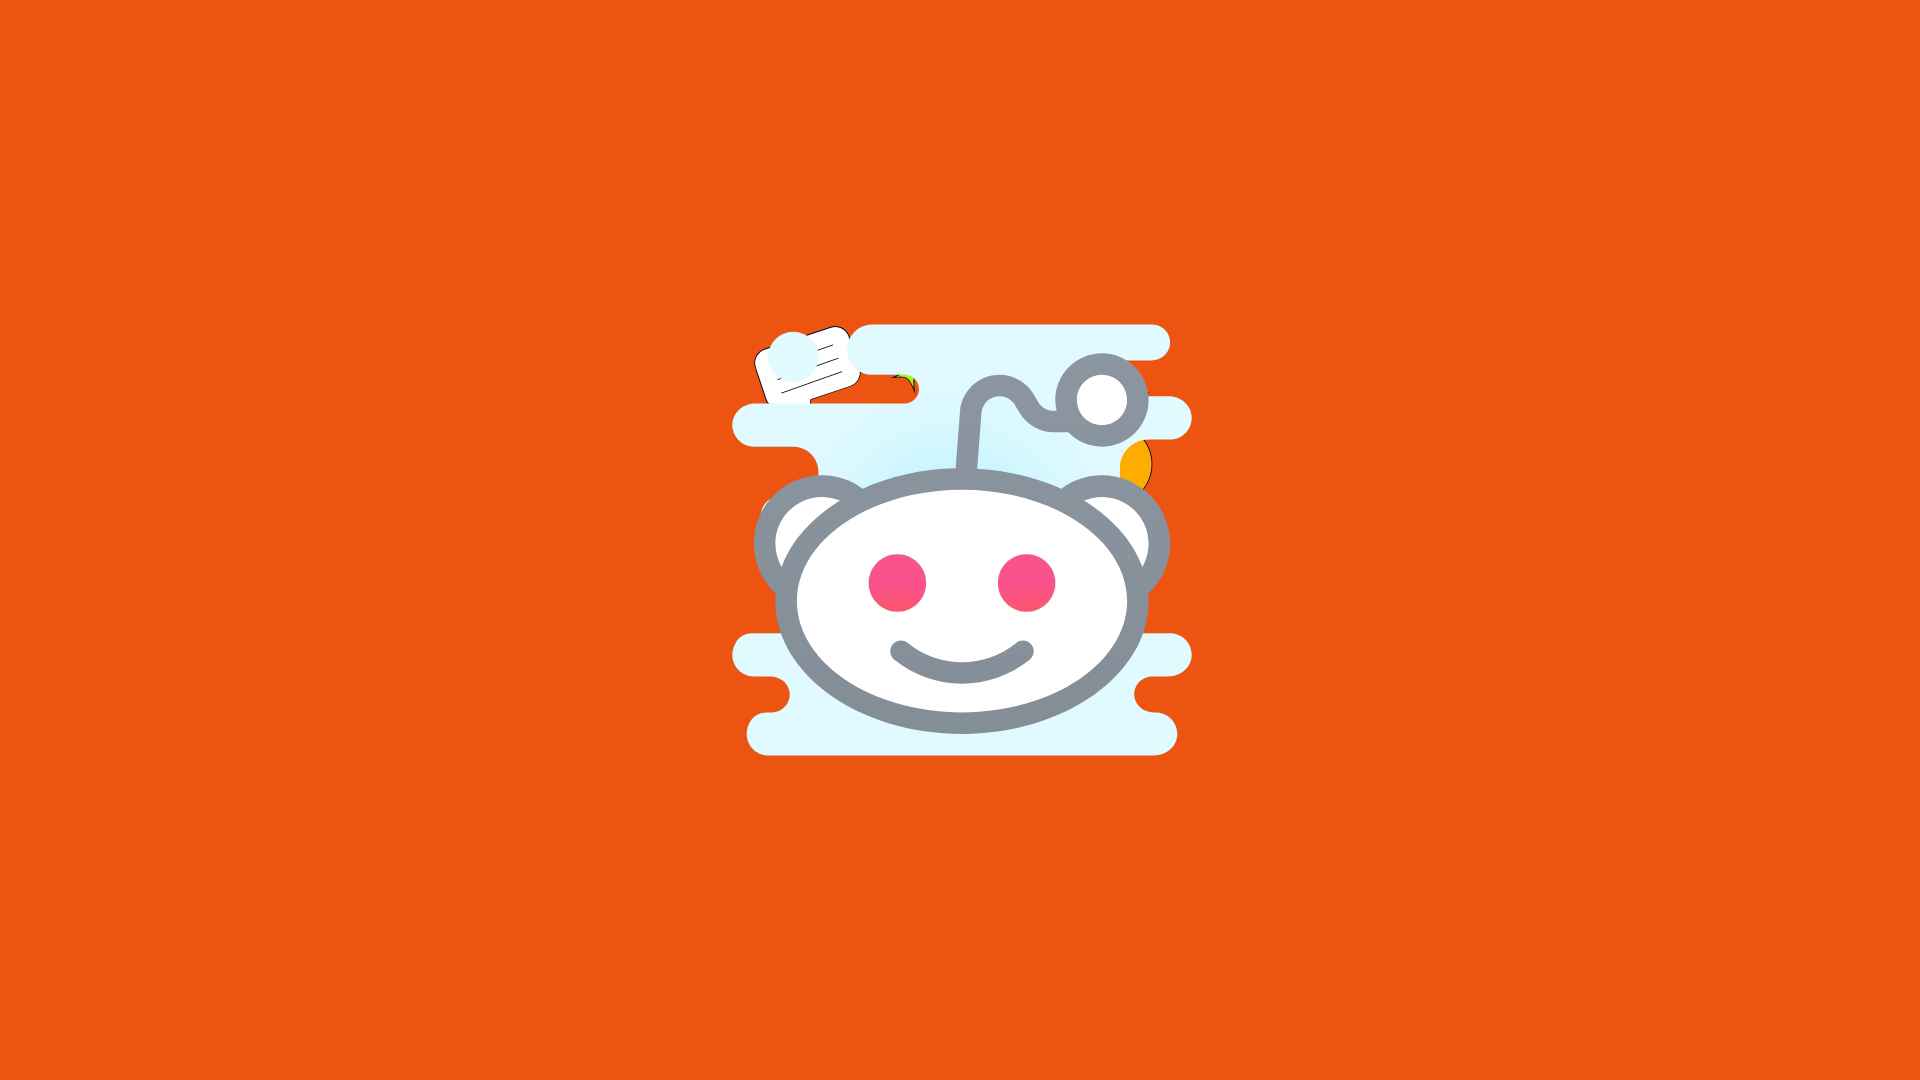 Can you use Reddit to promote a business or brand?